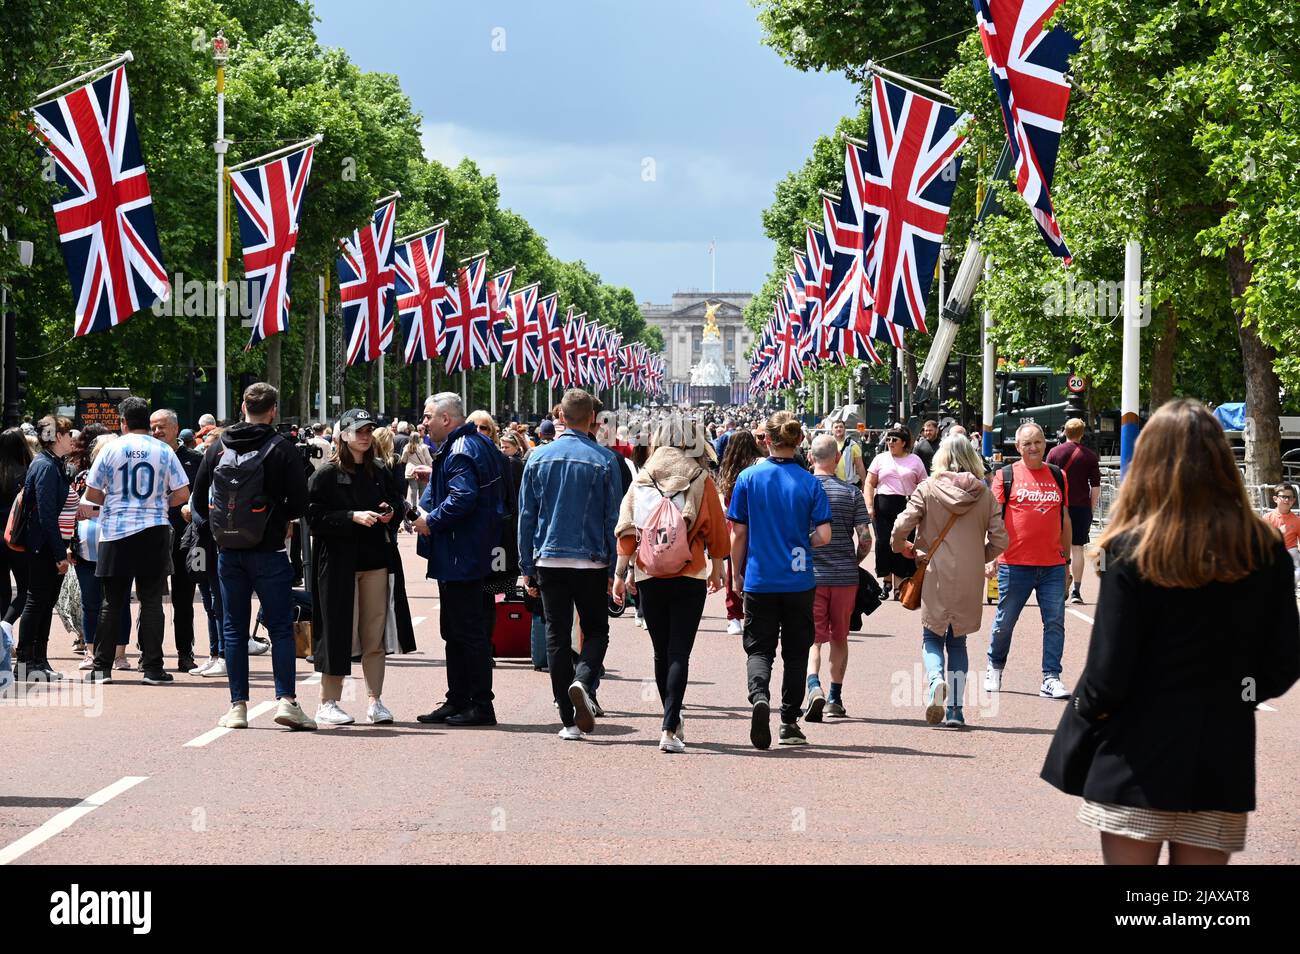 London, UK. 1st Jun 2022. Crowds gathered in the Mall today prior the the Queen's Platinum Jubilee. Credit: michael melia/Alamy Live News Stock Photo